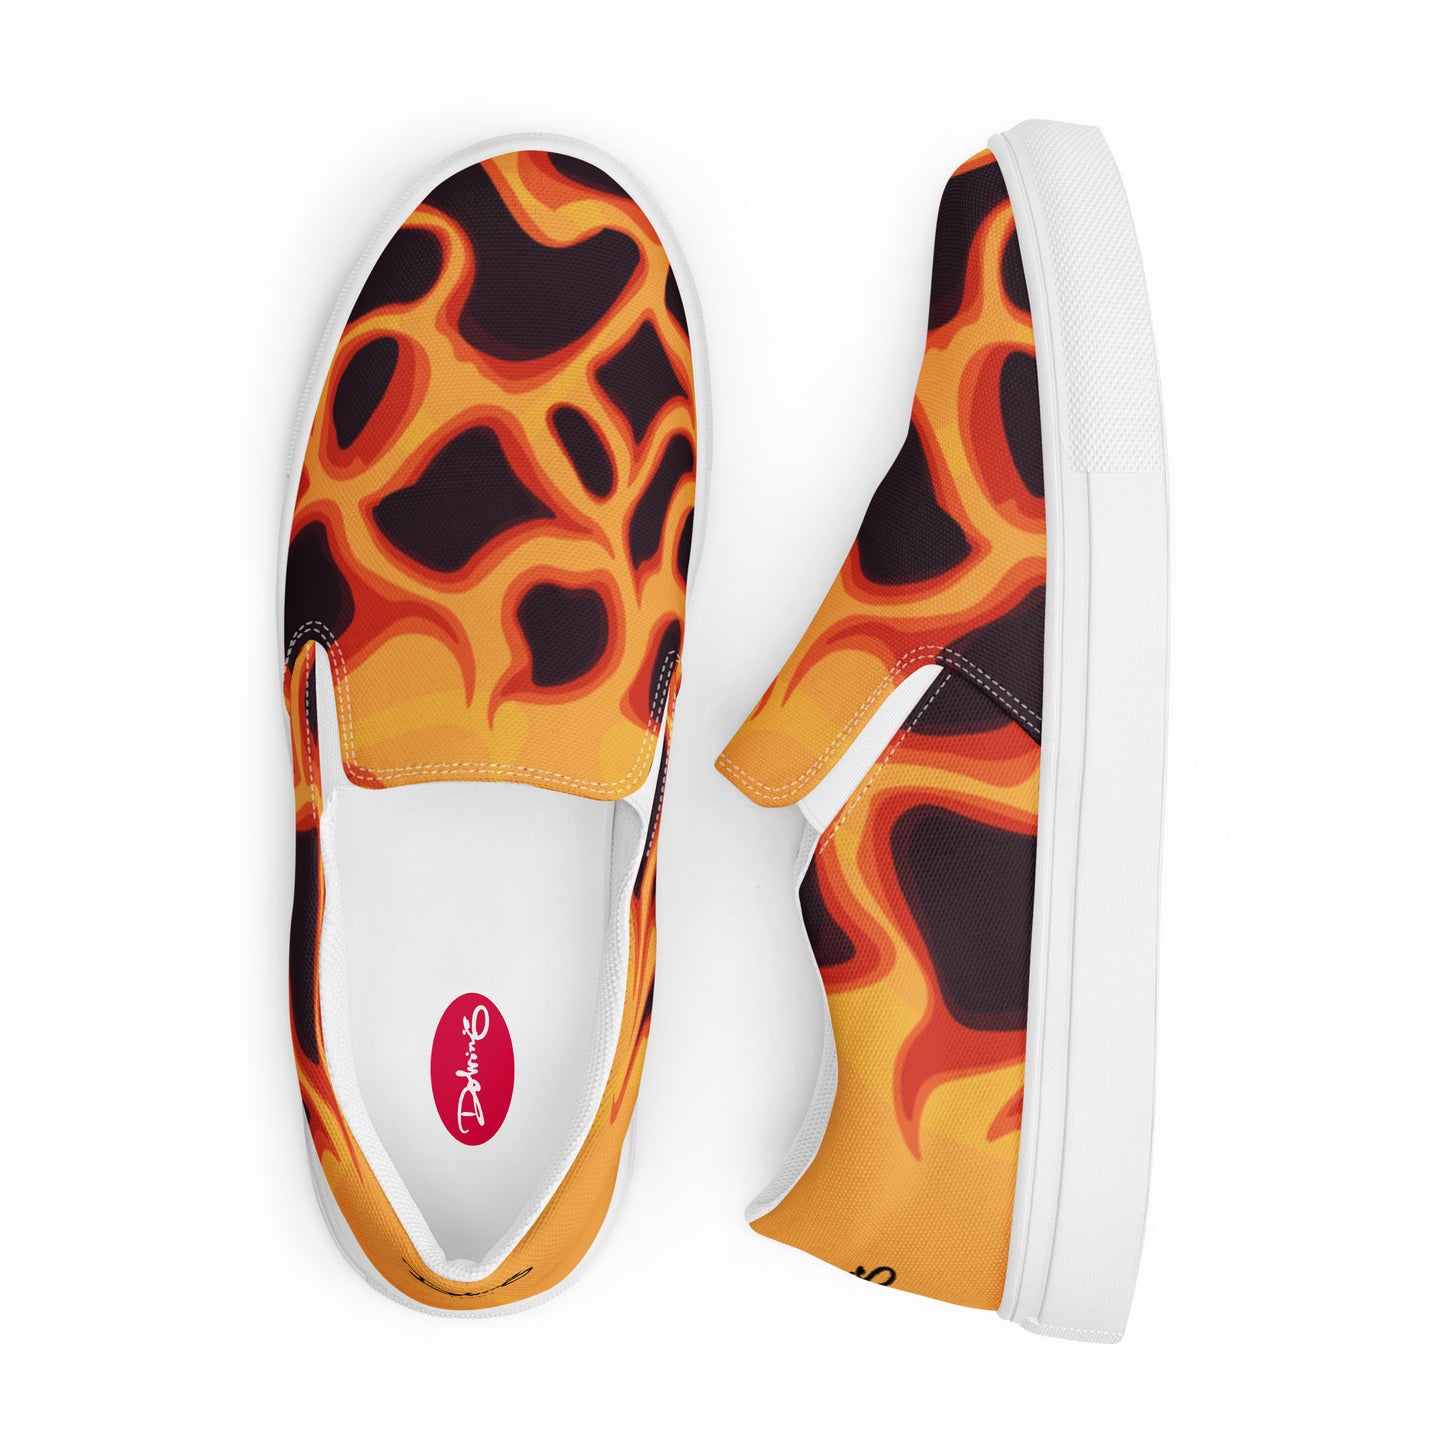 FIRE FIRE by DOLVING - Women’s slip-on canvas shoes